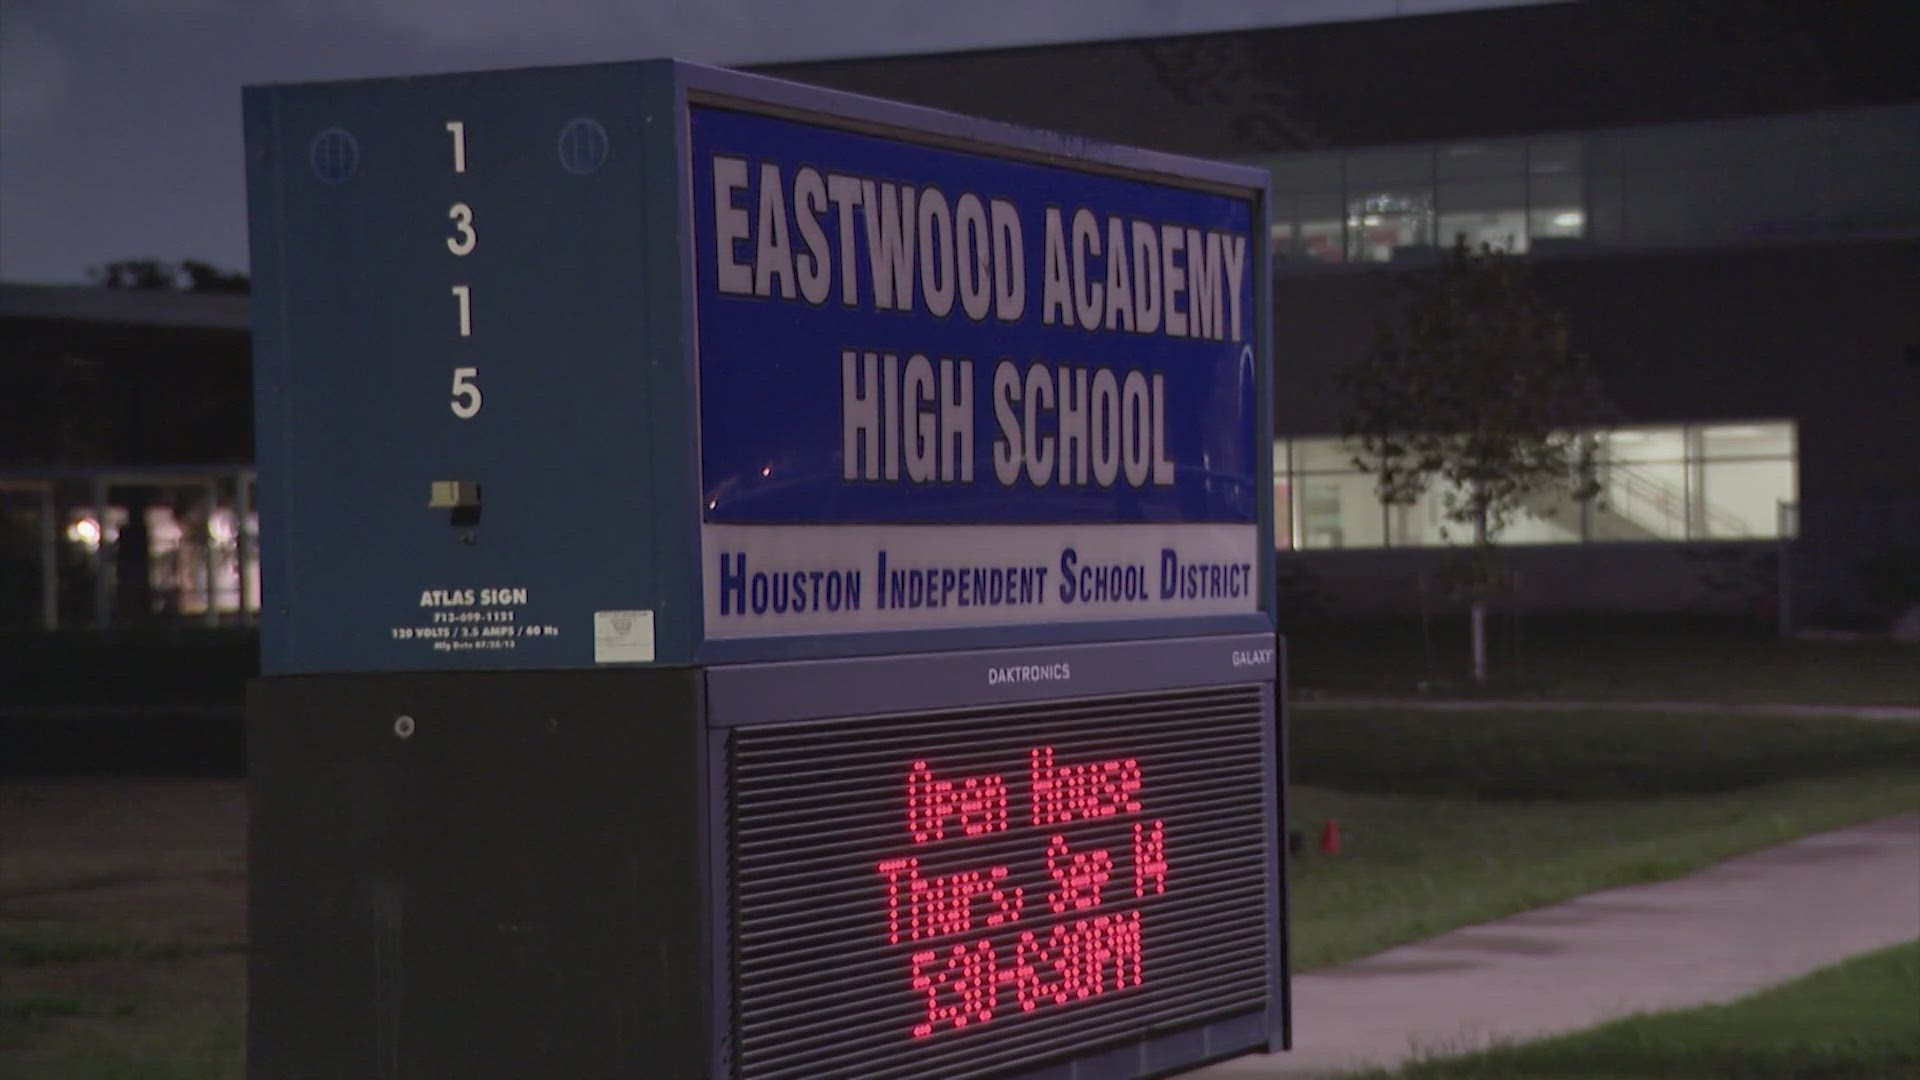 On Monday night, HISD called a meeting with parents and students at Eastwood Academy High School.